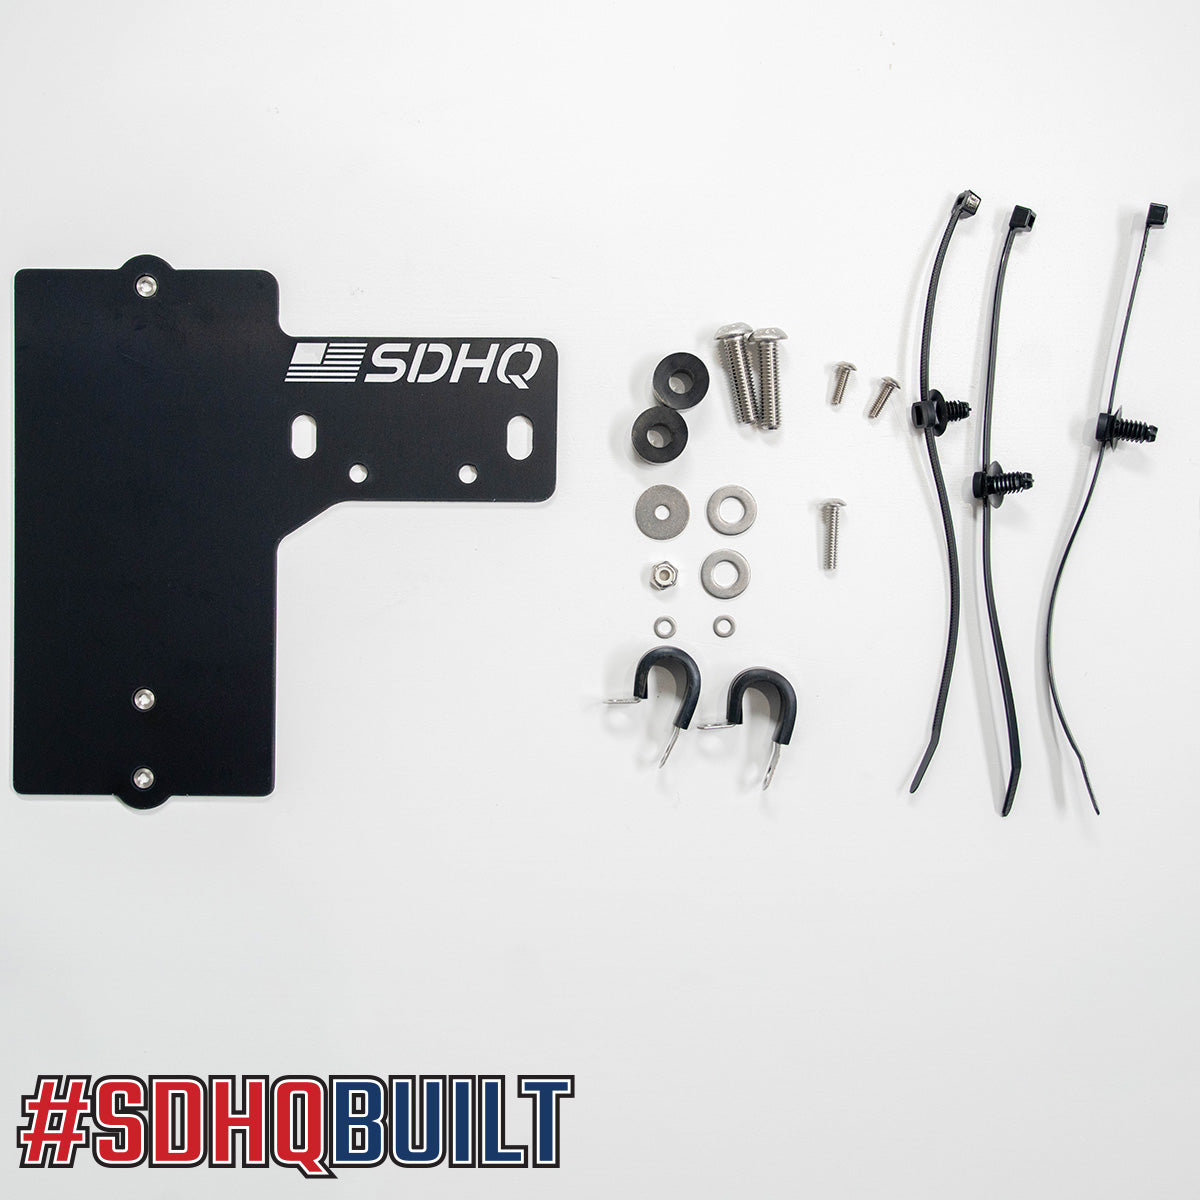 '05-23 Toyota Tacoma SDHQ Built Switch-Pros Power Module Mount Lighting SDHQ Off Road parts